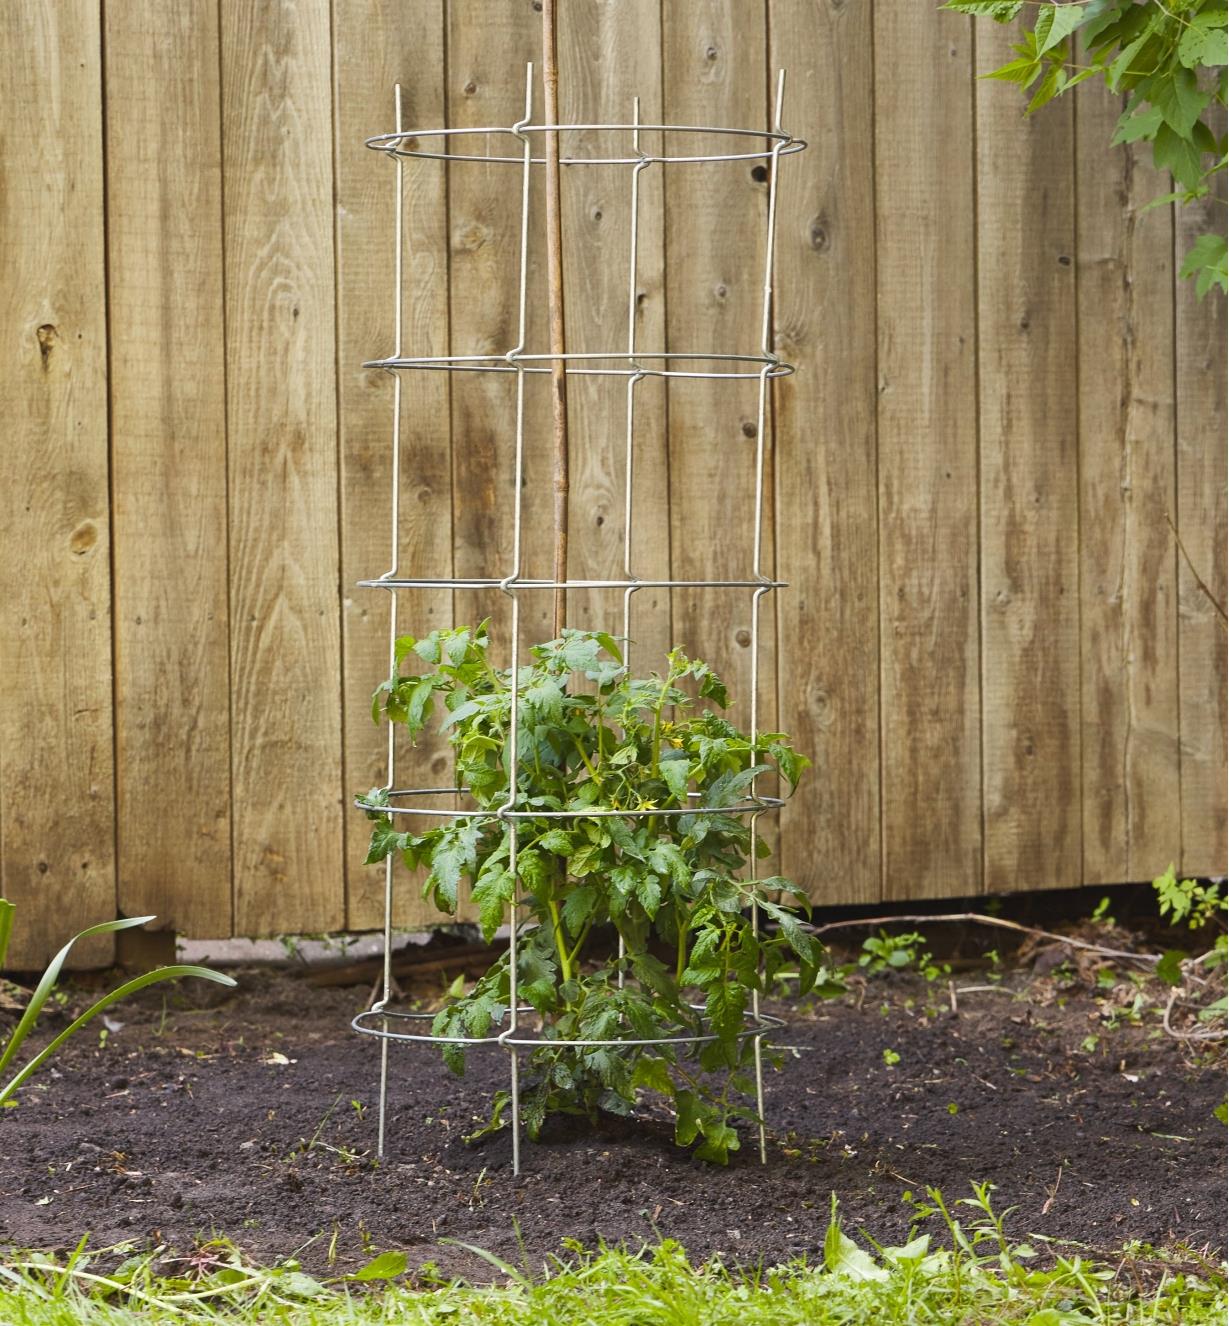 A tomato plant supported by the folding tomato cage